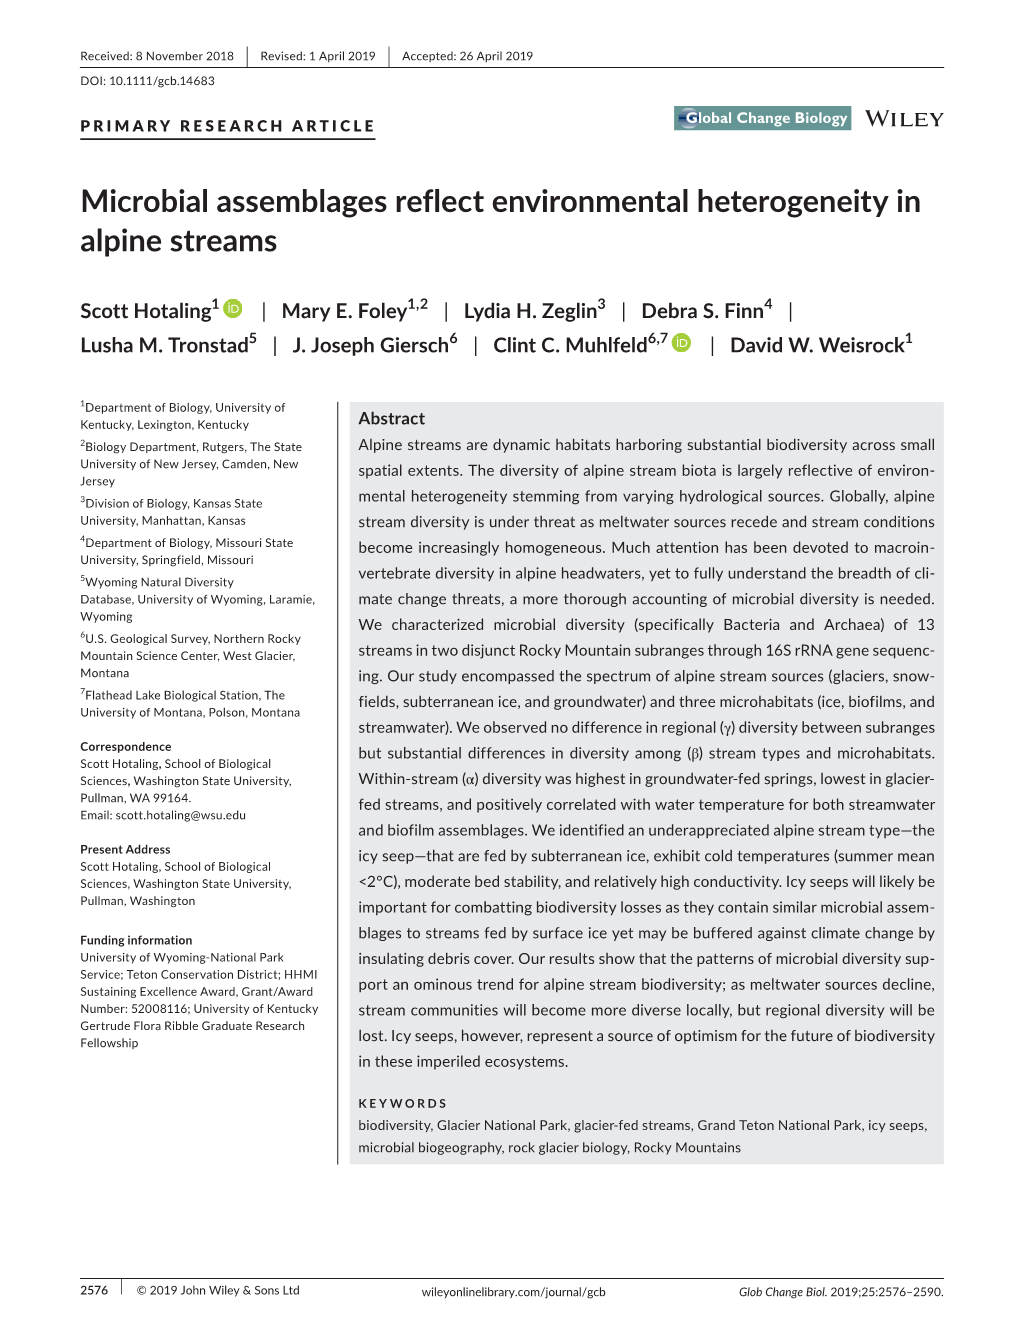 Microbial Assemblages Reflect Environmental Heterogeneity in Alpine Streams